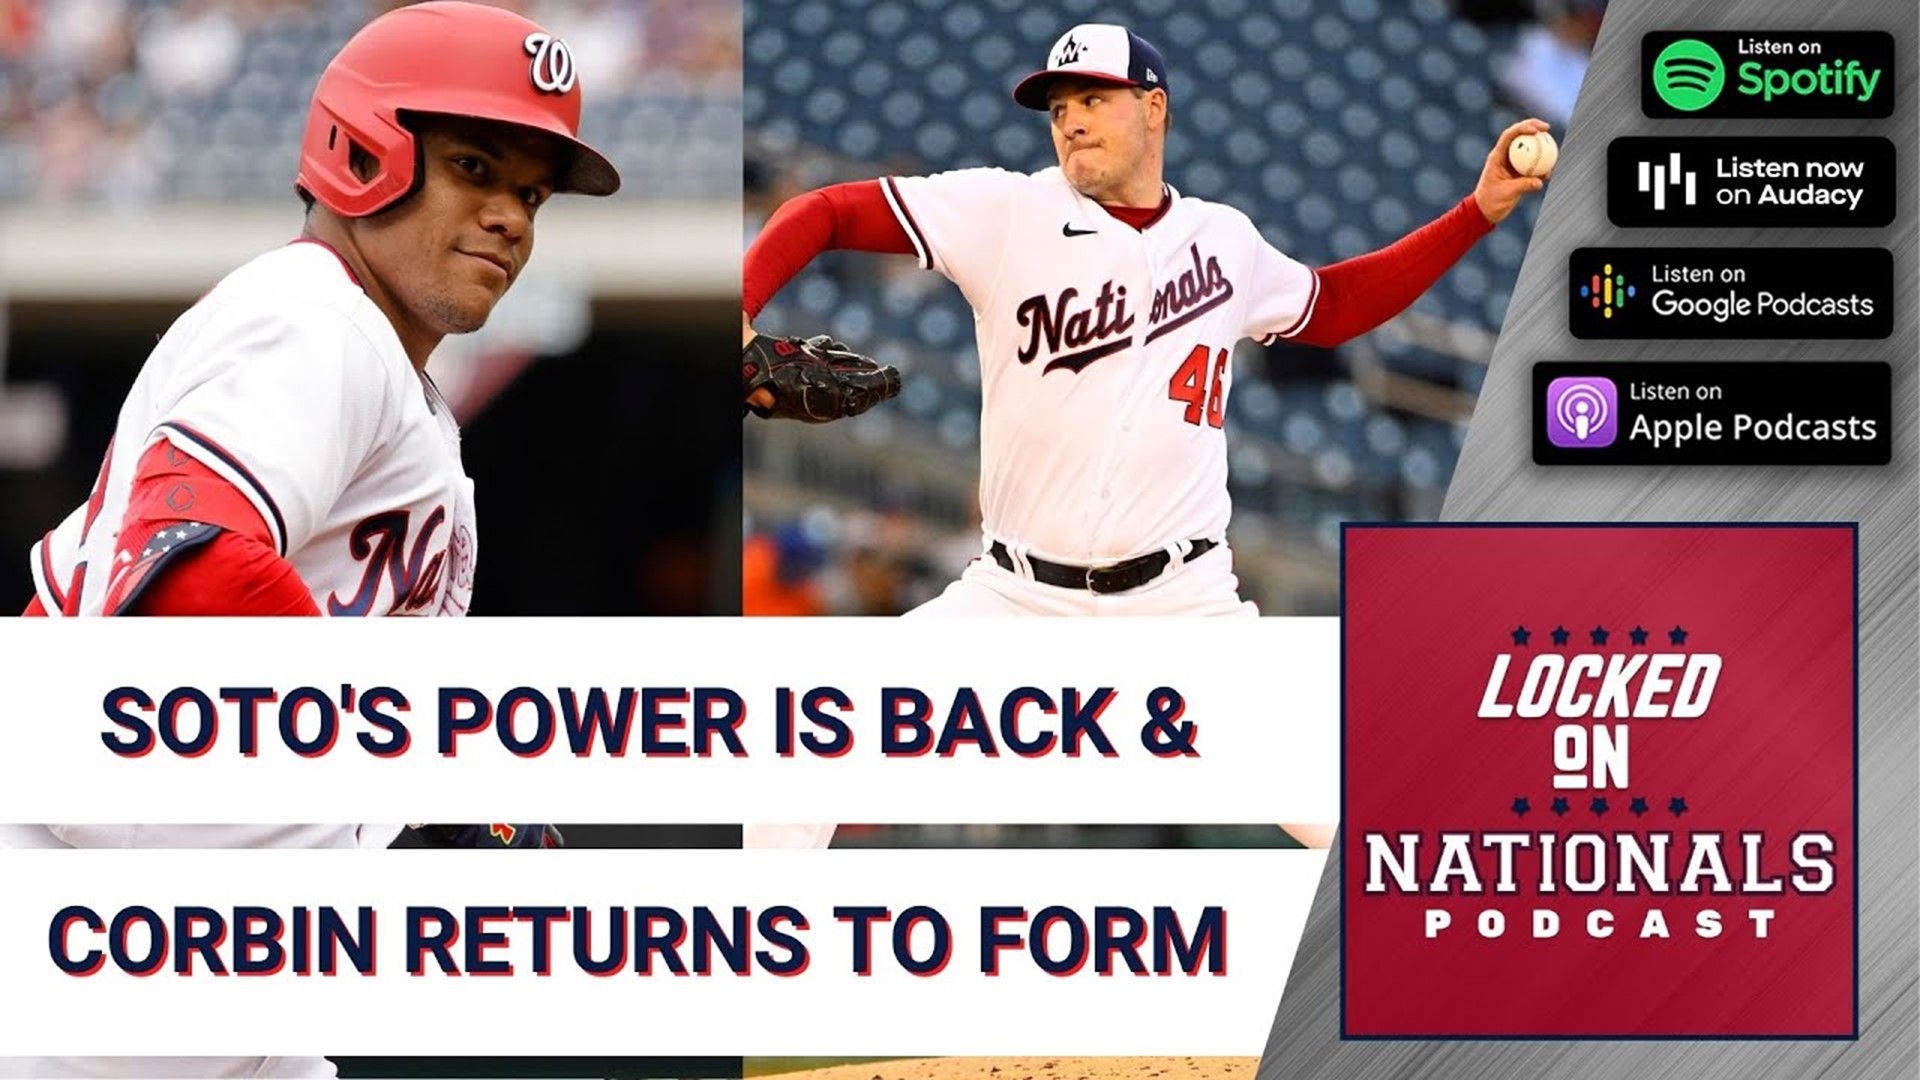 Josh Neighbors breaks down the 3-game series between the New York Mets and Washington Nationals we saw this past week in Washington DC.